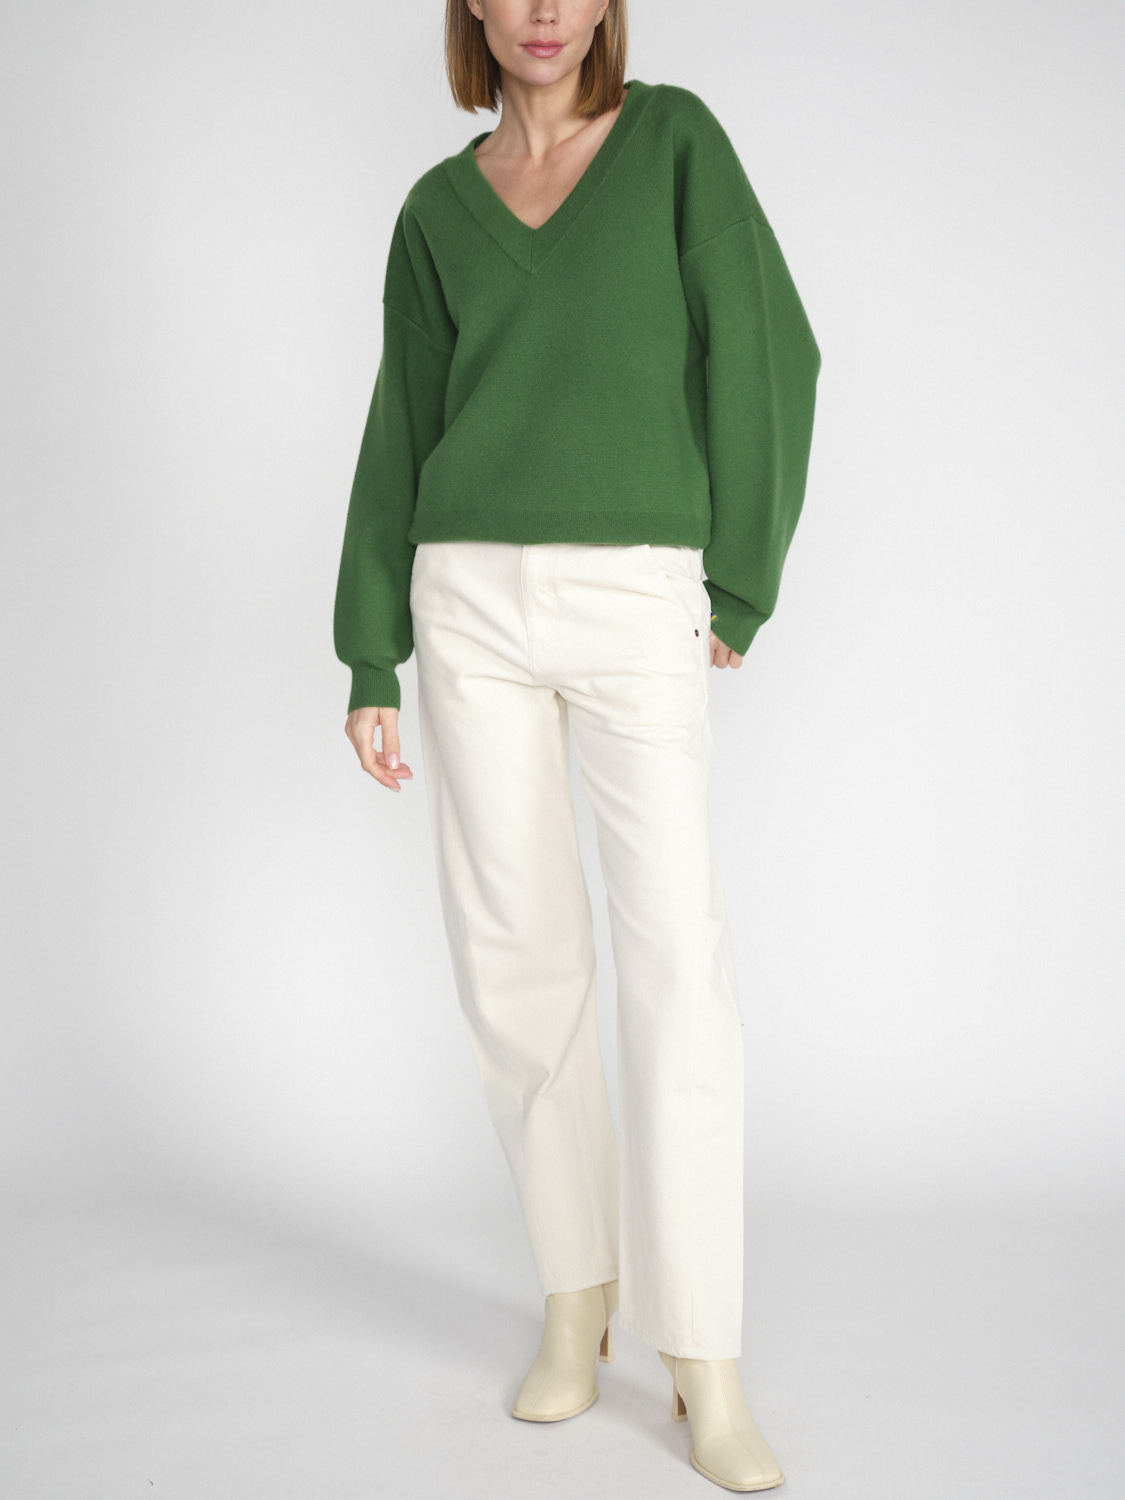 Extreme Cashmere N° 316 Lana - V-neck cashmere sweater  green One Size